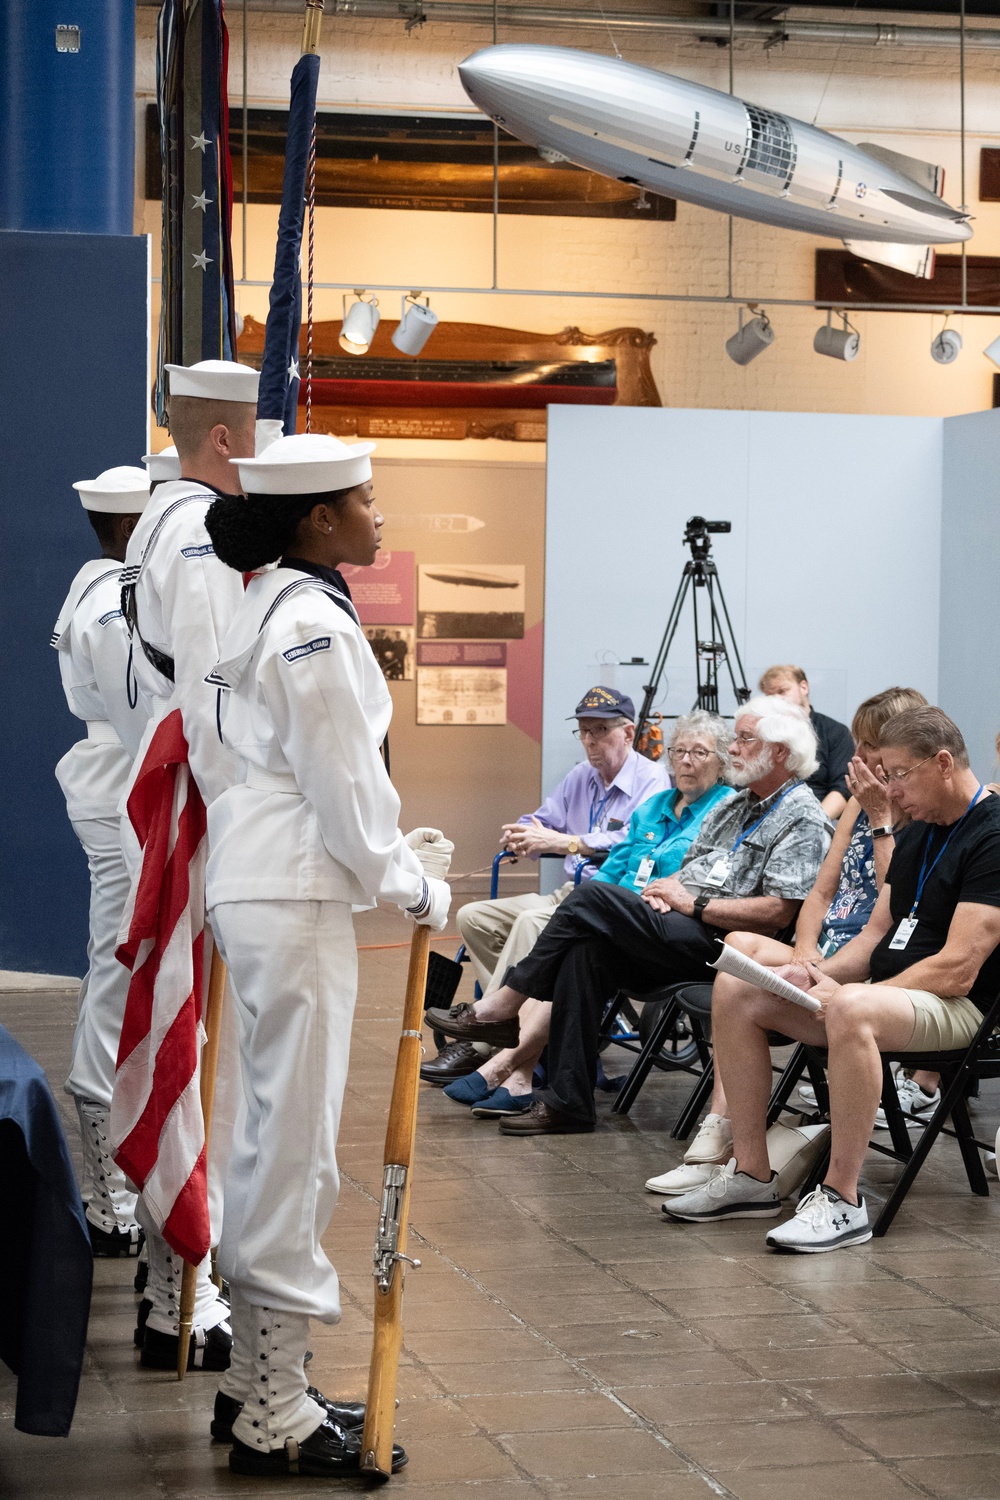 NHHC Receives Escort Carrier Artifacts from WWII Veterans, Families